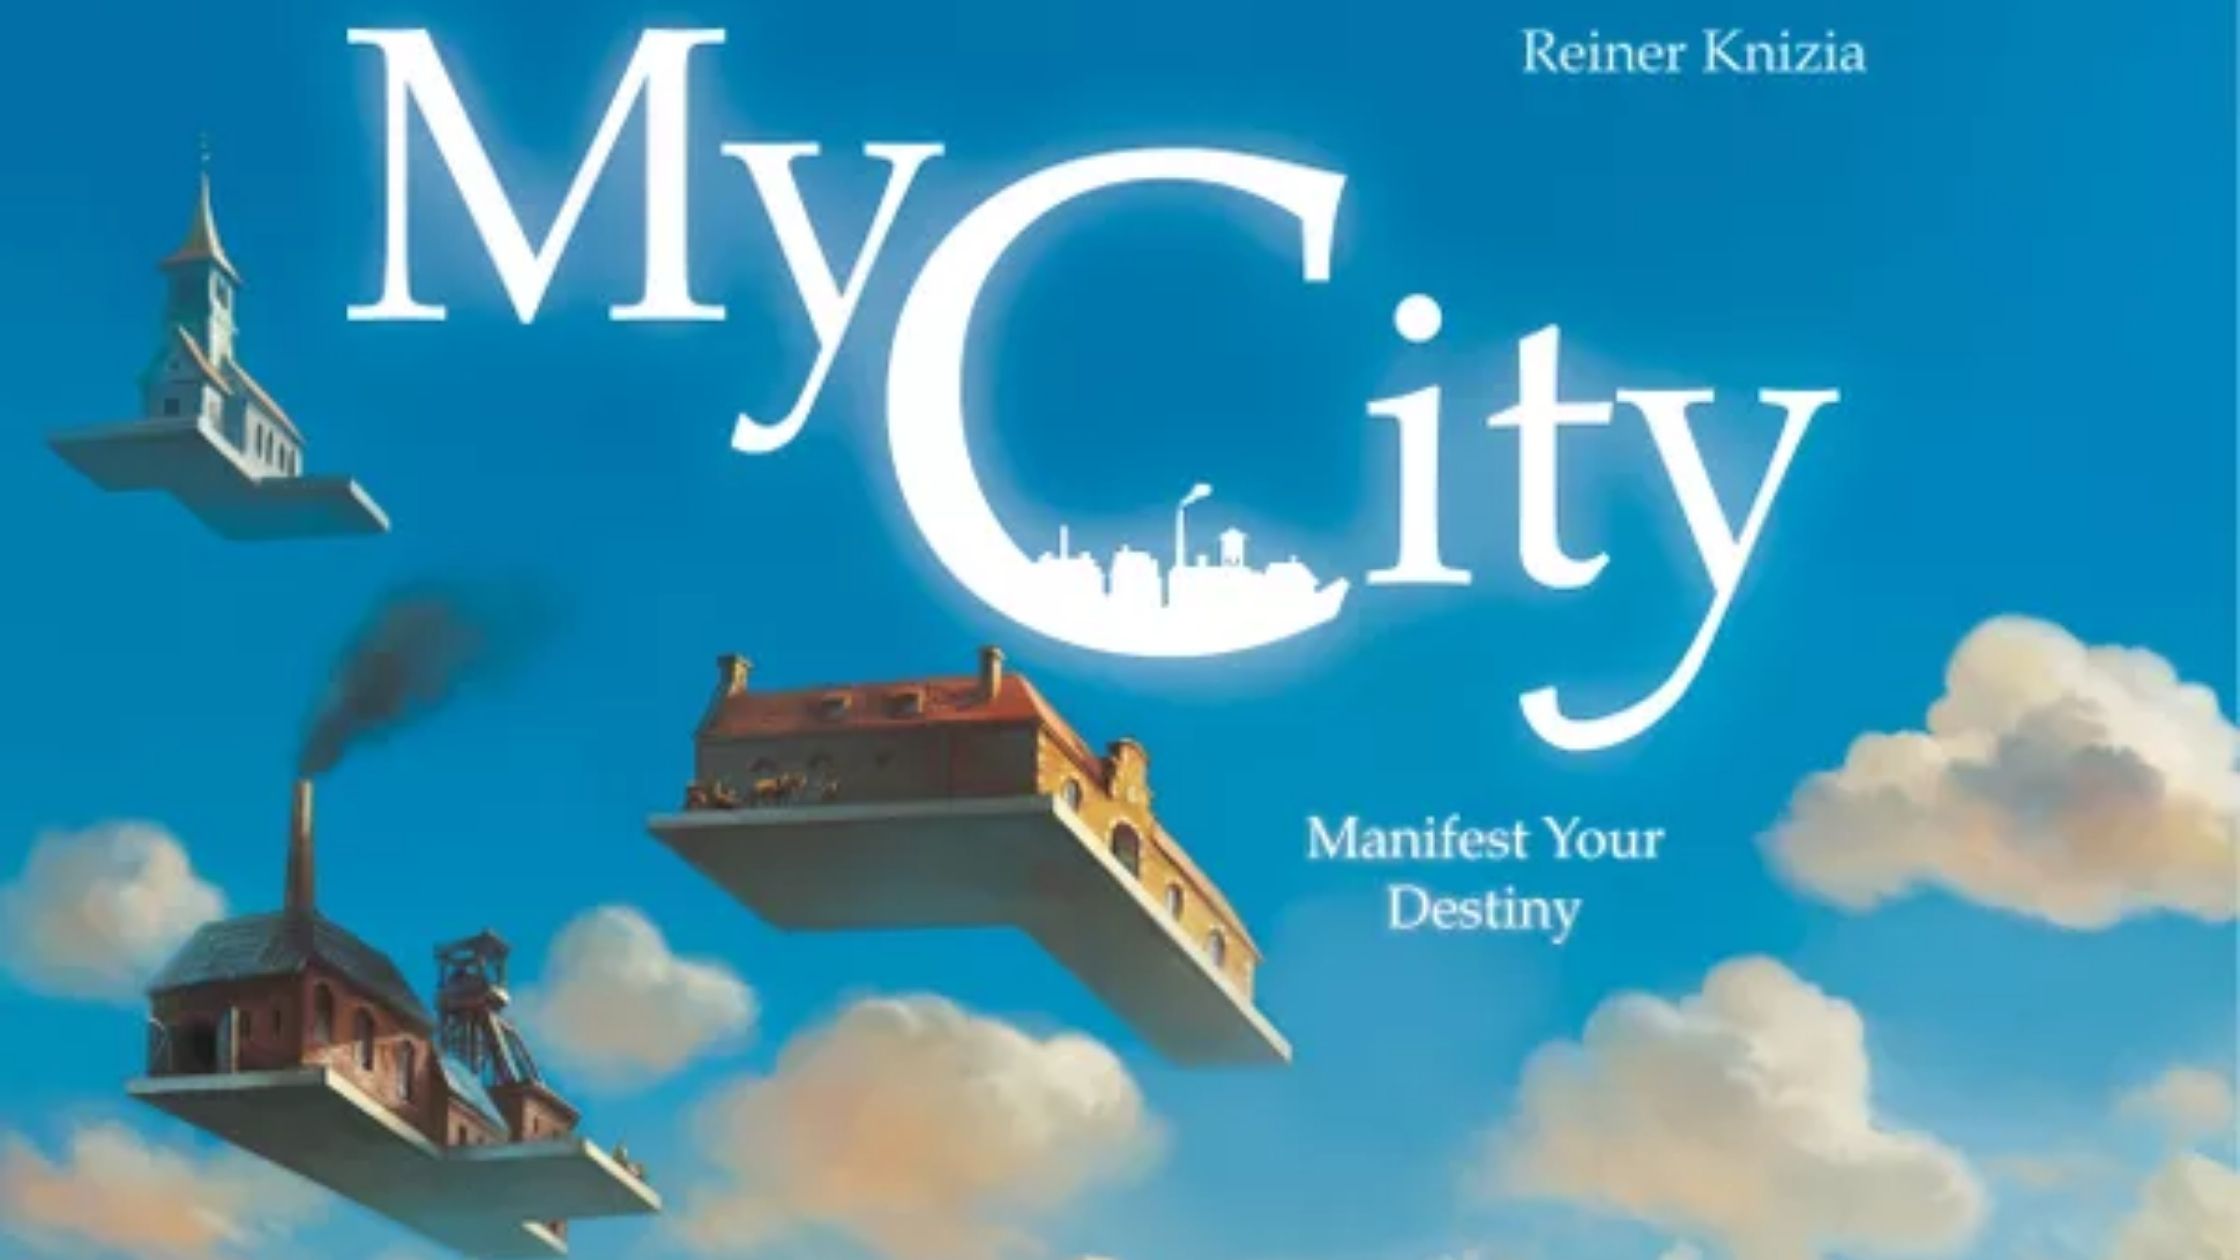 My City lands on the list of the best legacy board games for 2 players